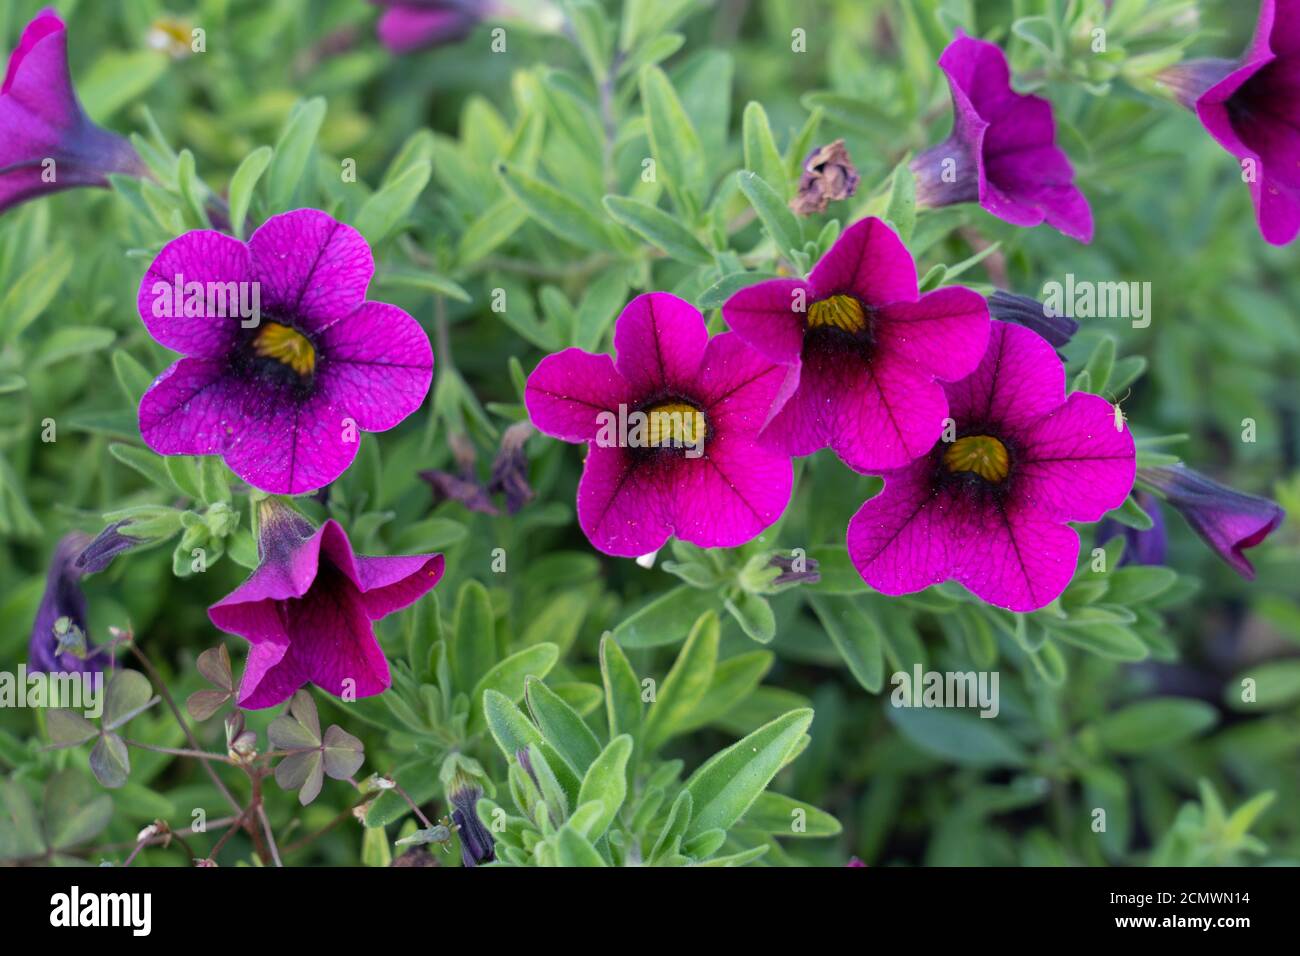 Pink magenta flowers of Calibrachoa parviflora, a flowering plant in the nightshade family known by the common name seaside petunia Stock Photo